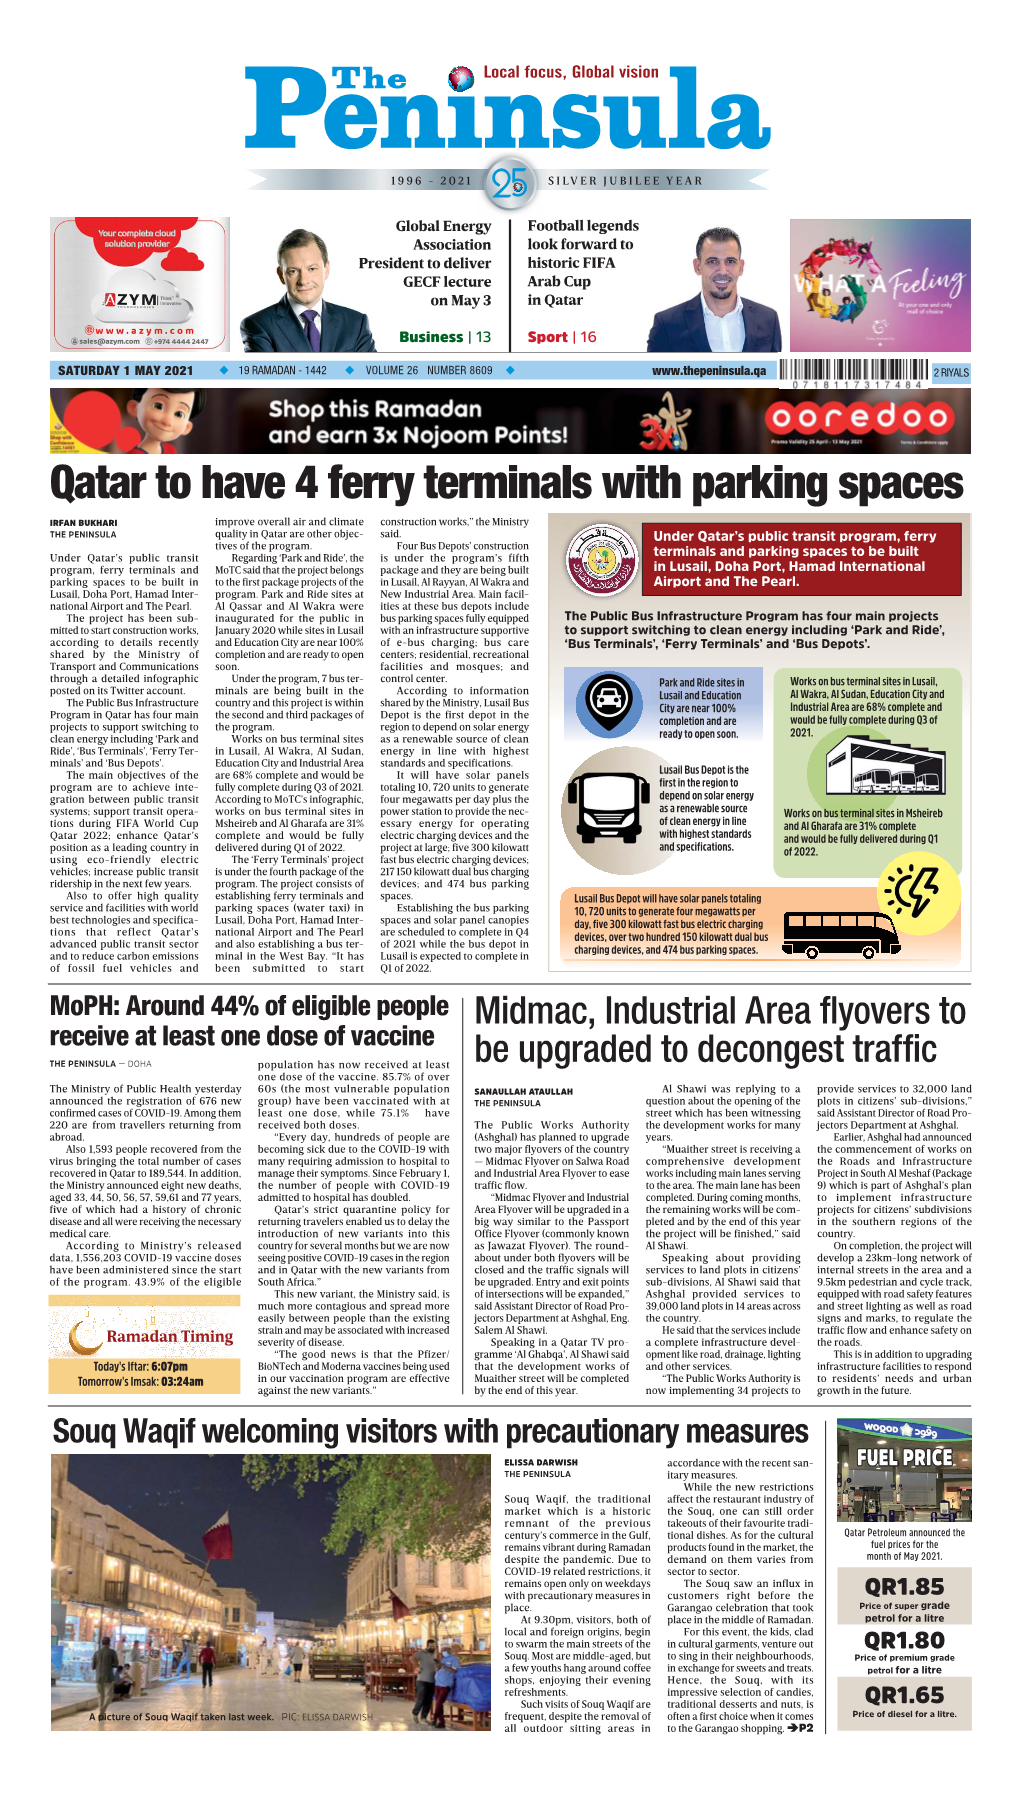 Qatar to Have 4 Ferry Terminals with Parking Spaces